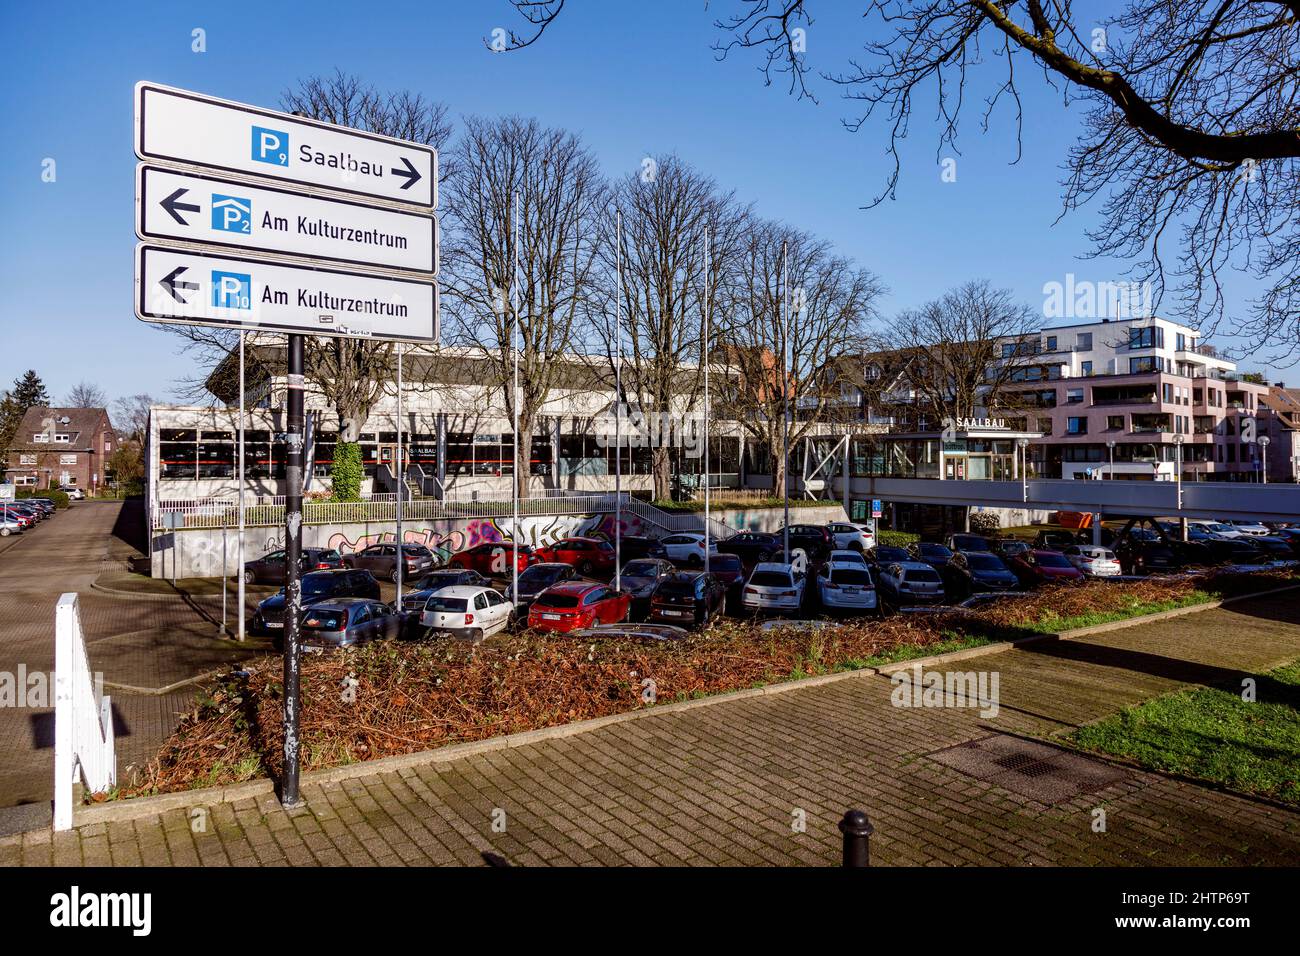 Saalbau Bottrop, culture and event center Stock Photo